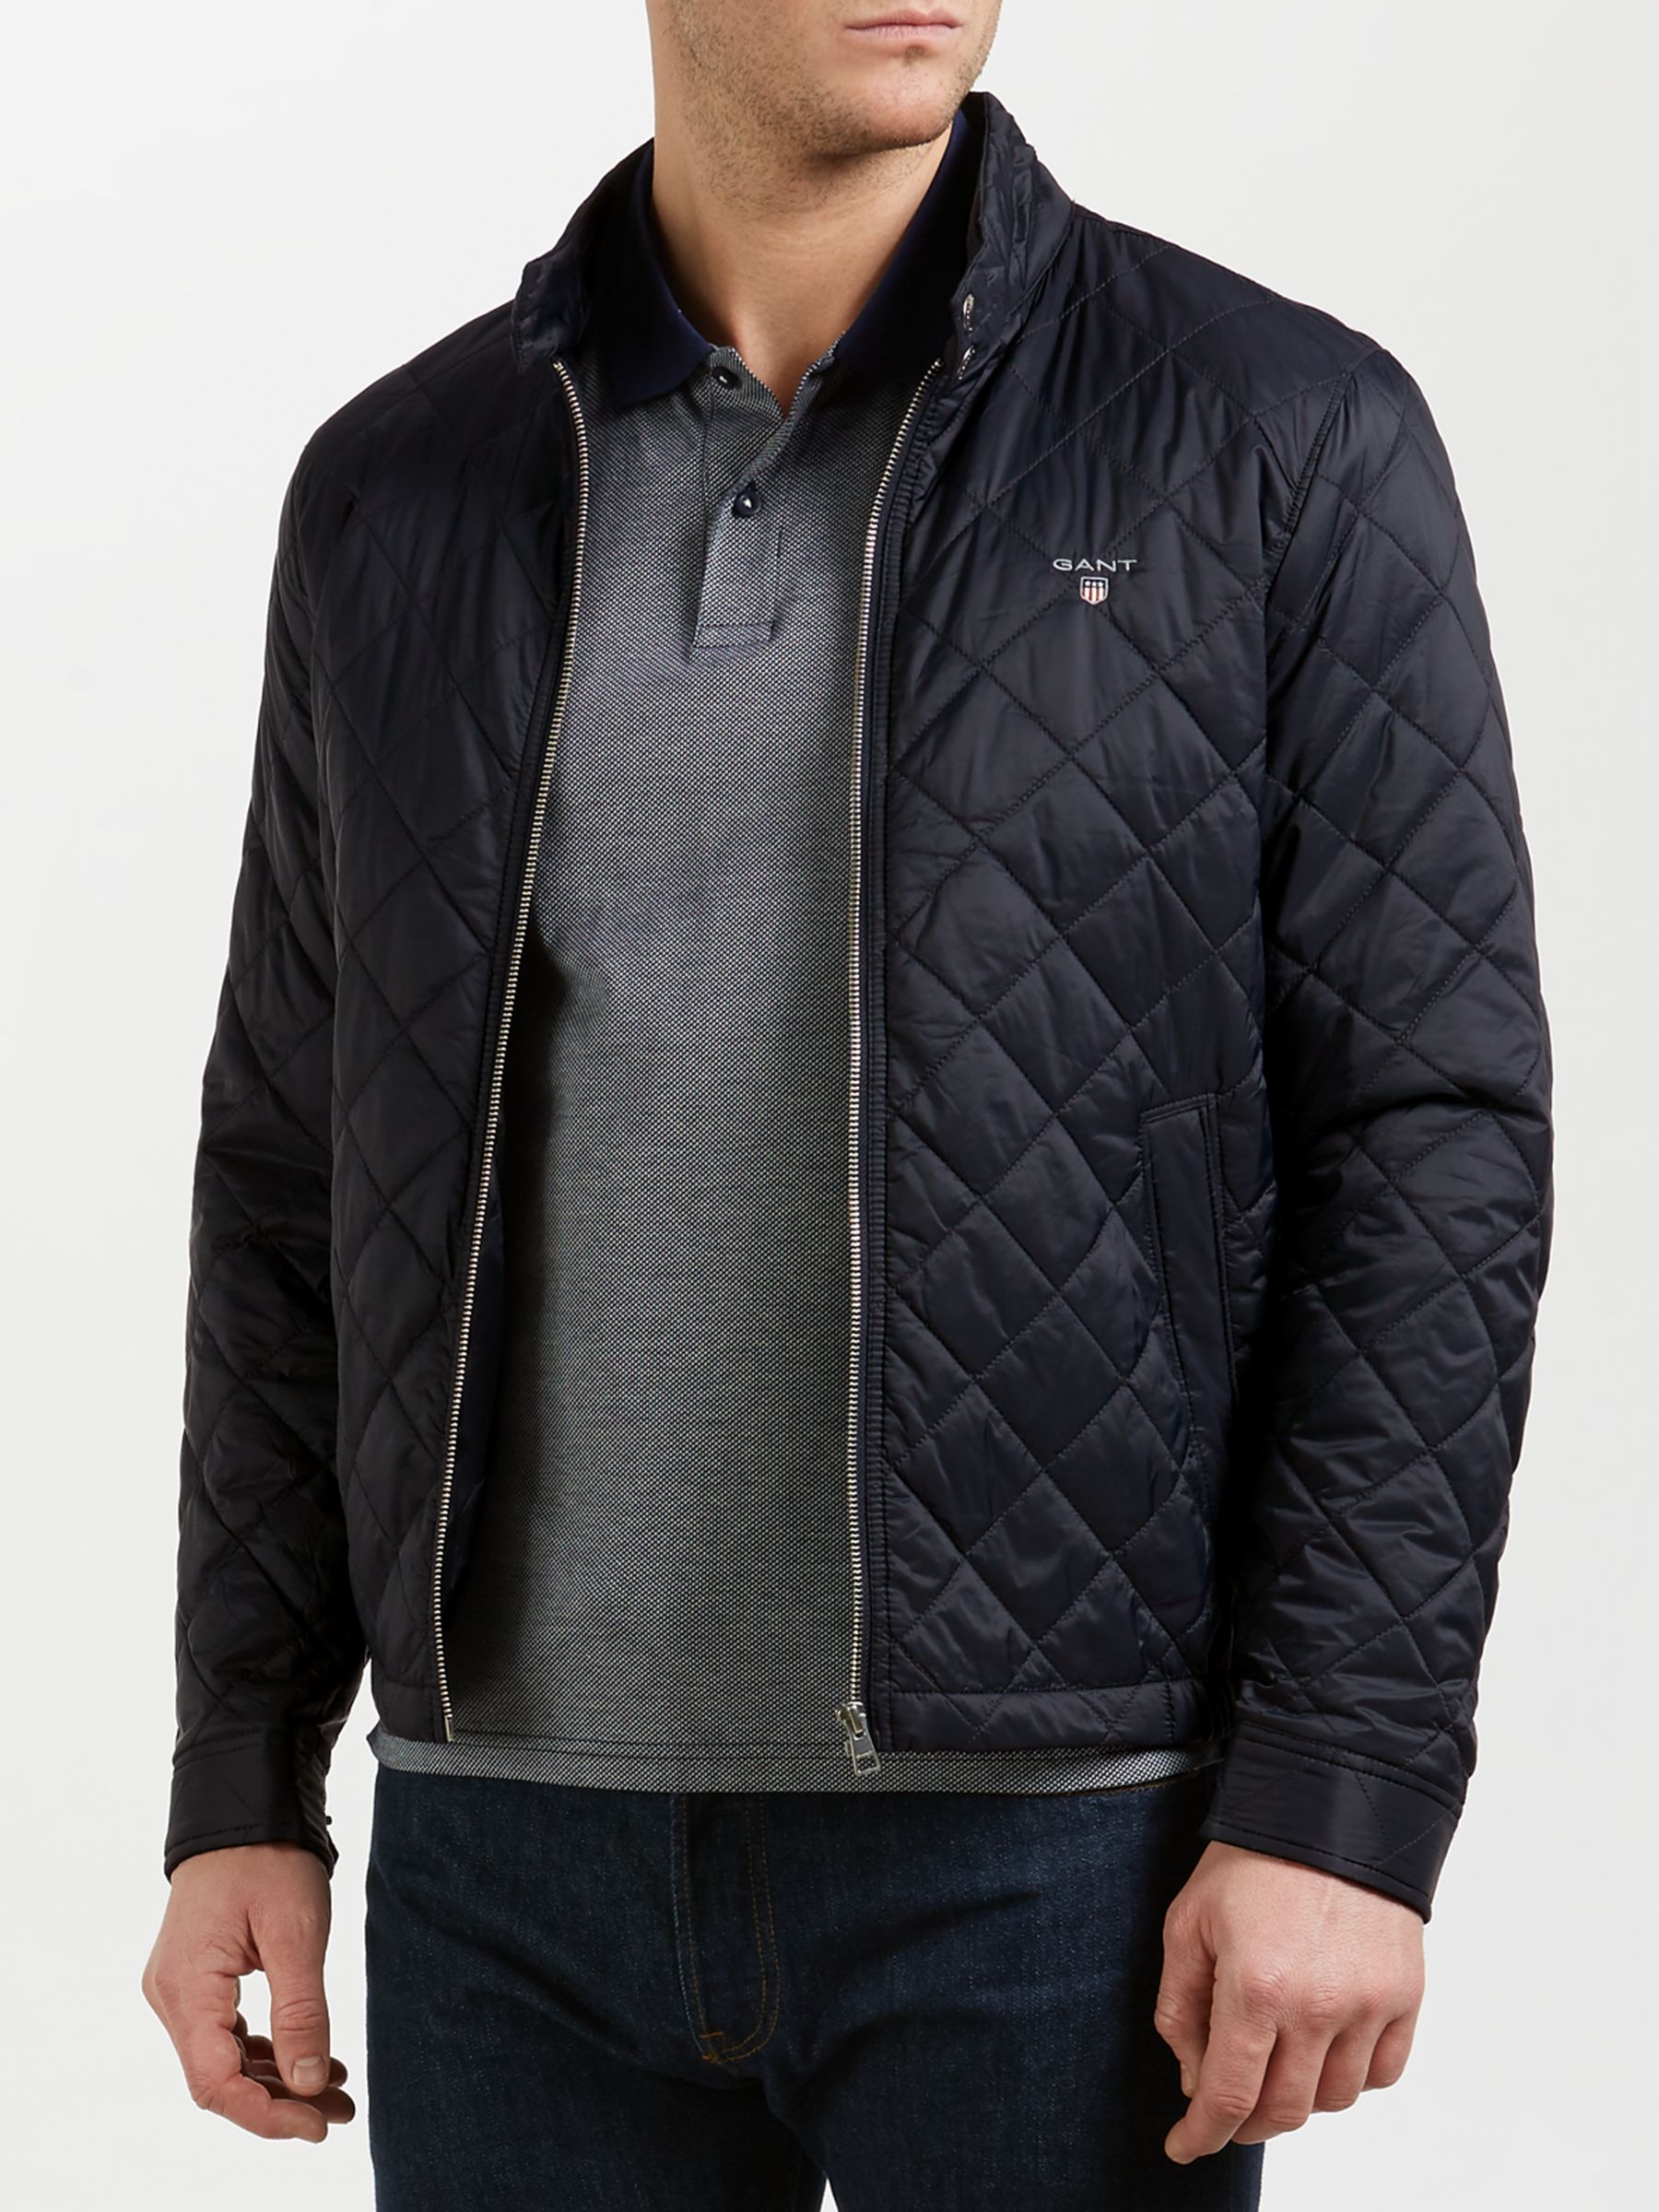 Gant Windcheater Quilted Jacket, Navy at John Lewis & Partners